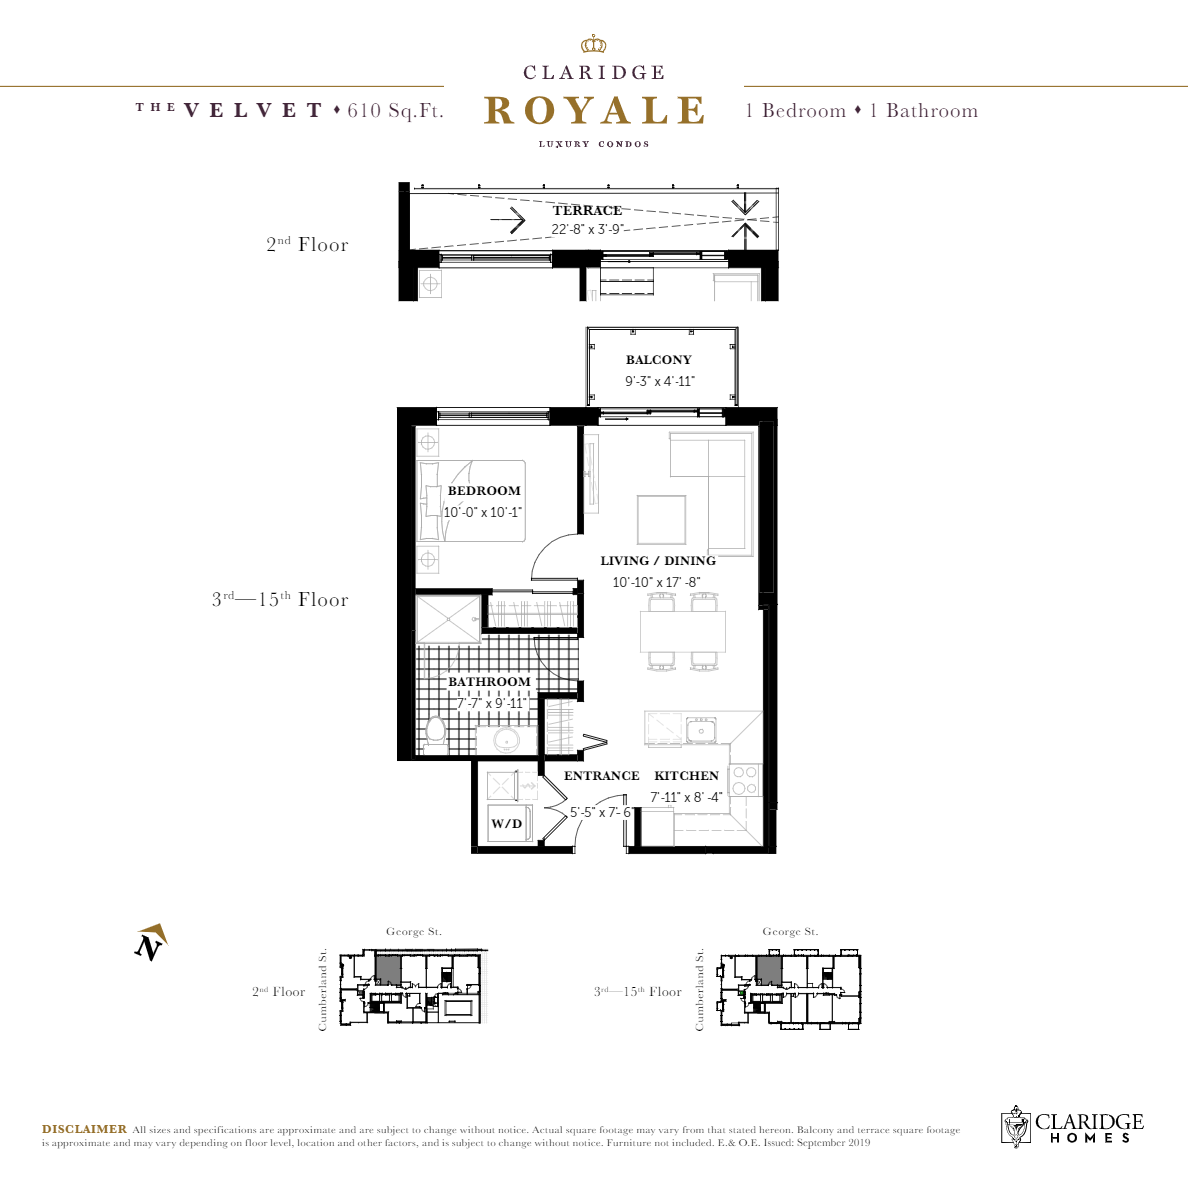  Floor Plan of Claridge Royale Condos with undefined beds